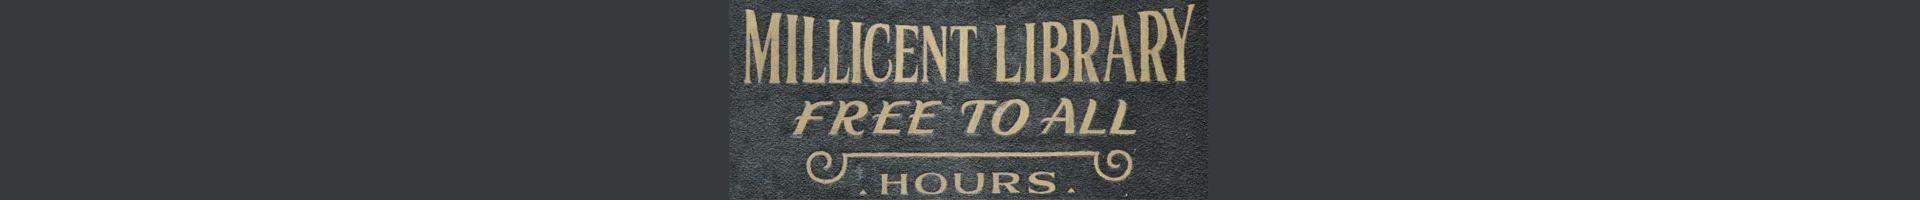 Old Library Hours Sign. Millicent Library Free to All - Hours